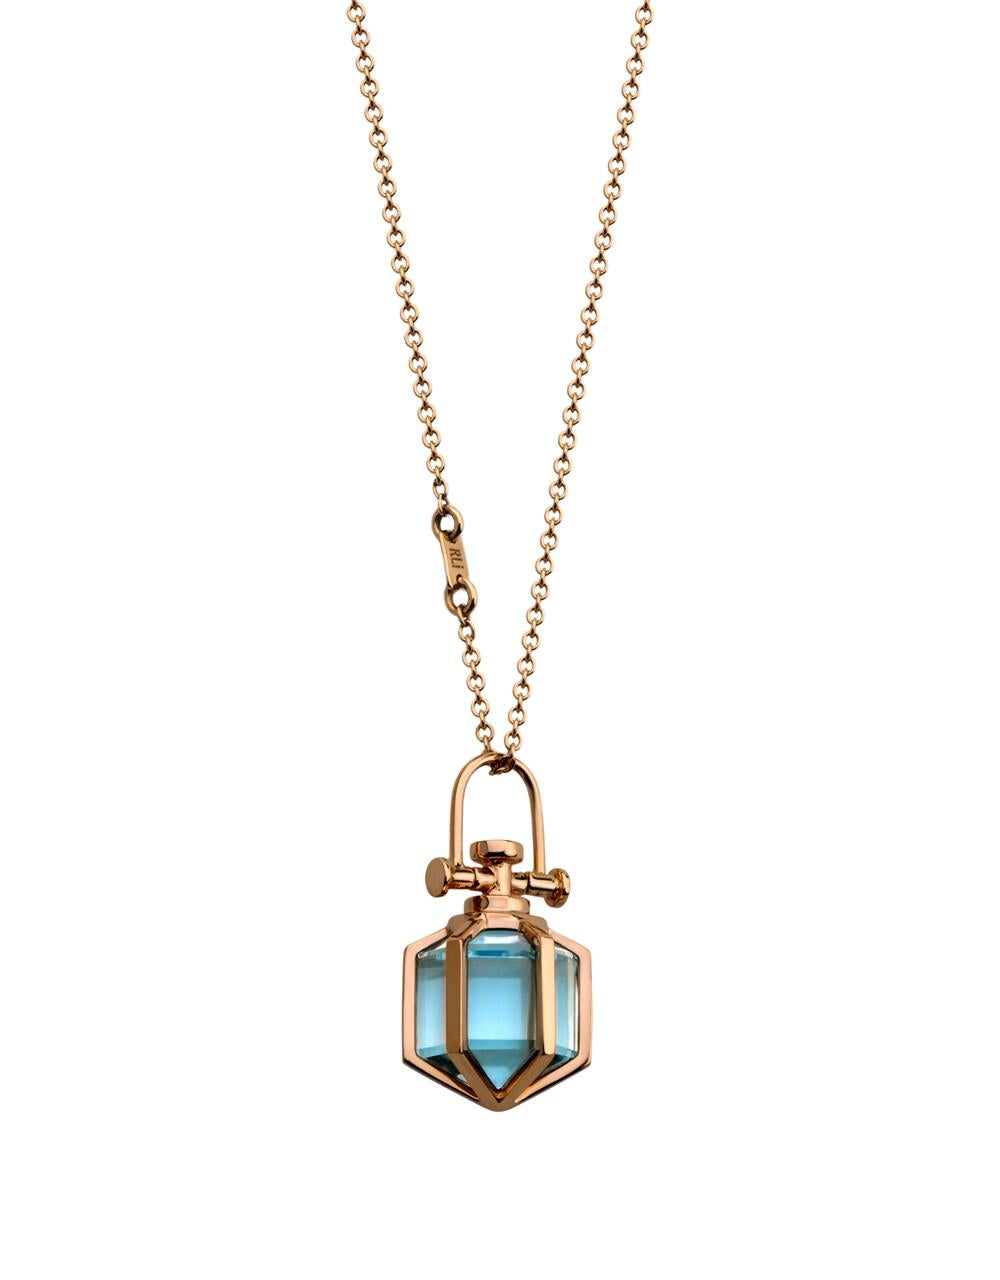 Rebecca Li designs mindfulness.
This elegant dainty necklace is from her signature Six Senses Talisman Collection.

Talisman Pendant :
18k rose gold
Natural healing blue topaz crystal
Pendant size: 9 mm W * 9 mm D * 18 mm H
Blue topaz size:  8 mm W